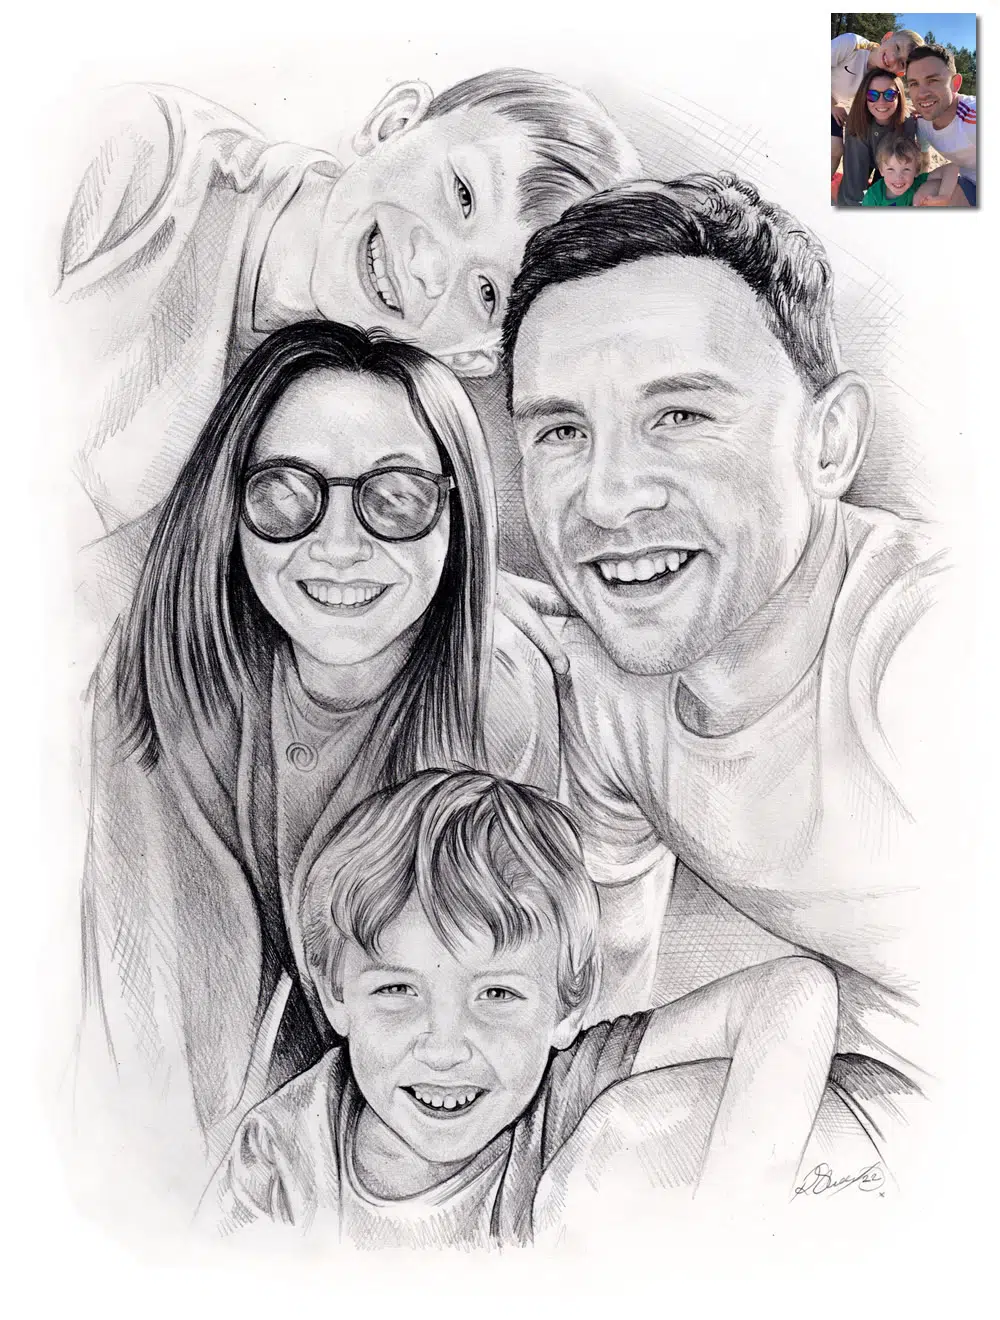 Draw A Picture Of A Happy Family For Children - YouTube